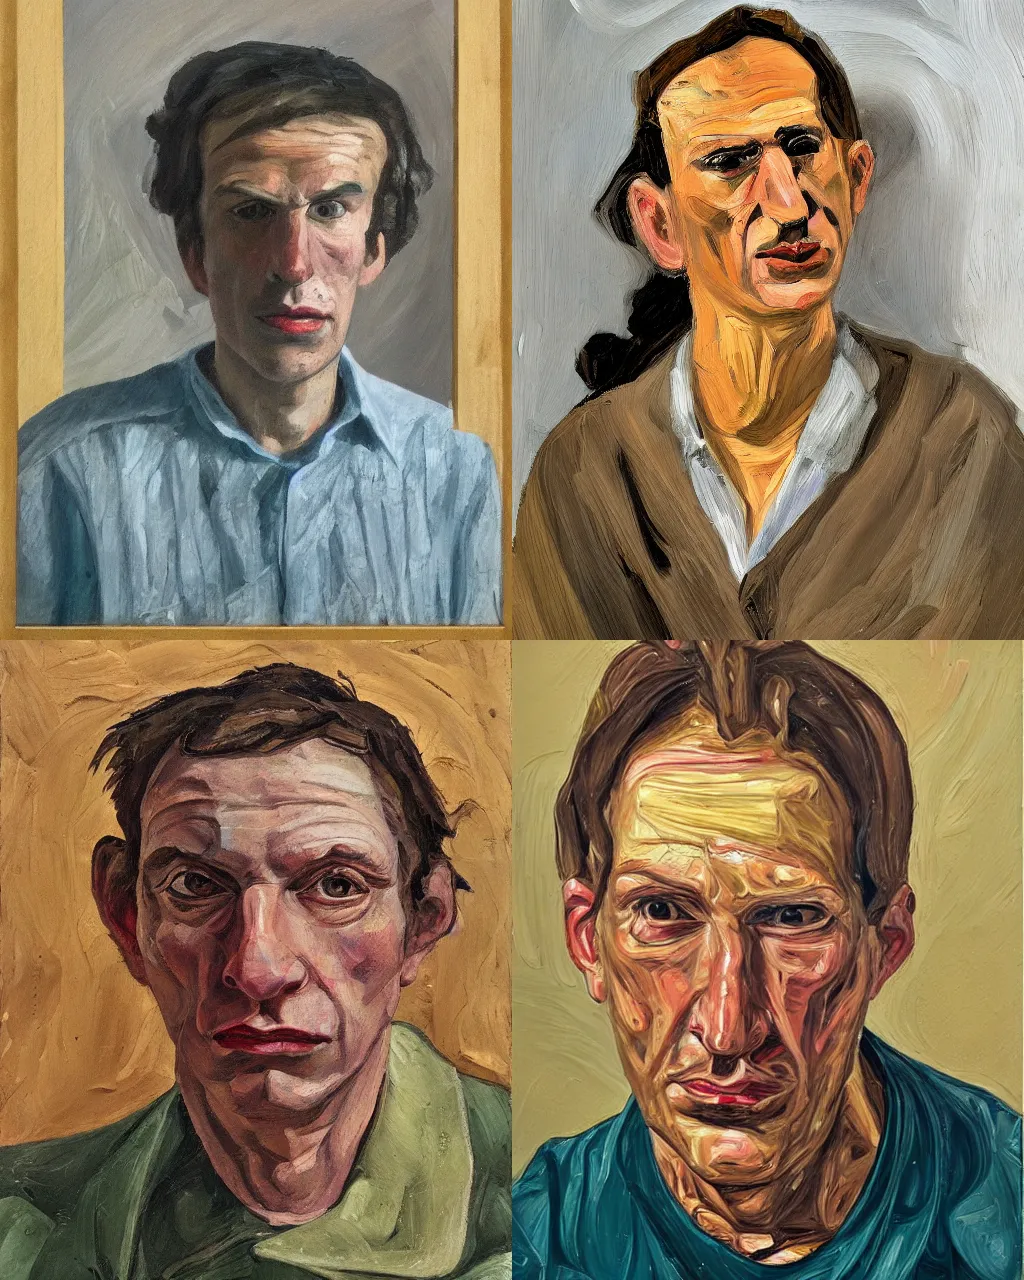 Prompt: Medium shot of a typical character in the style of Lucian Freud